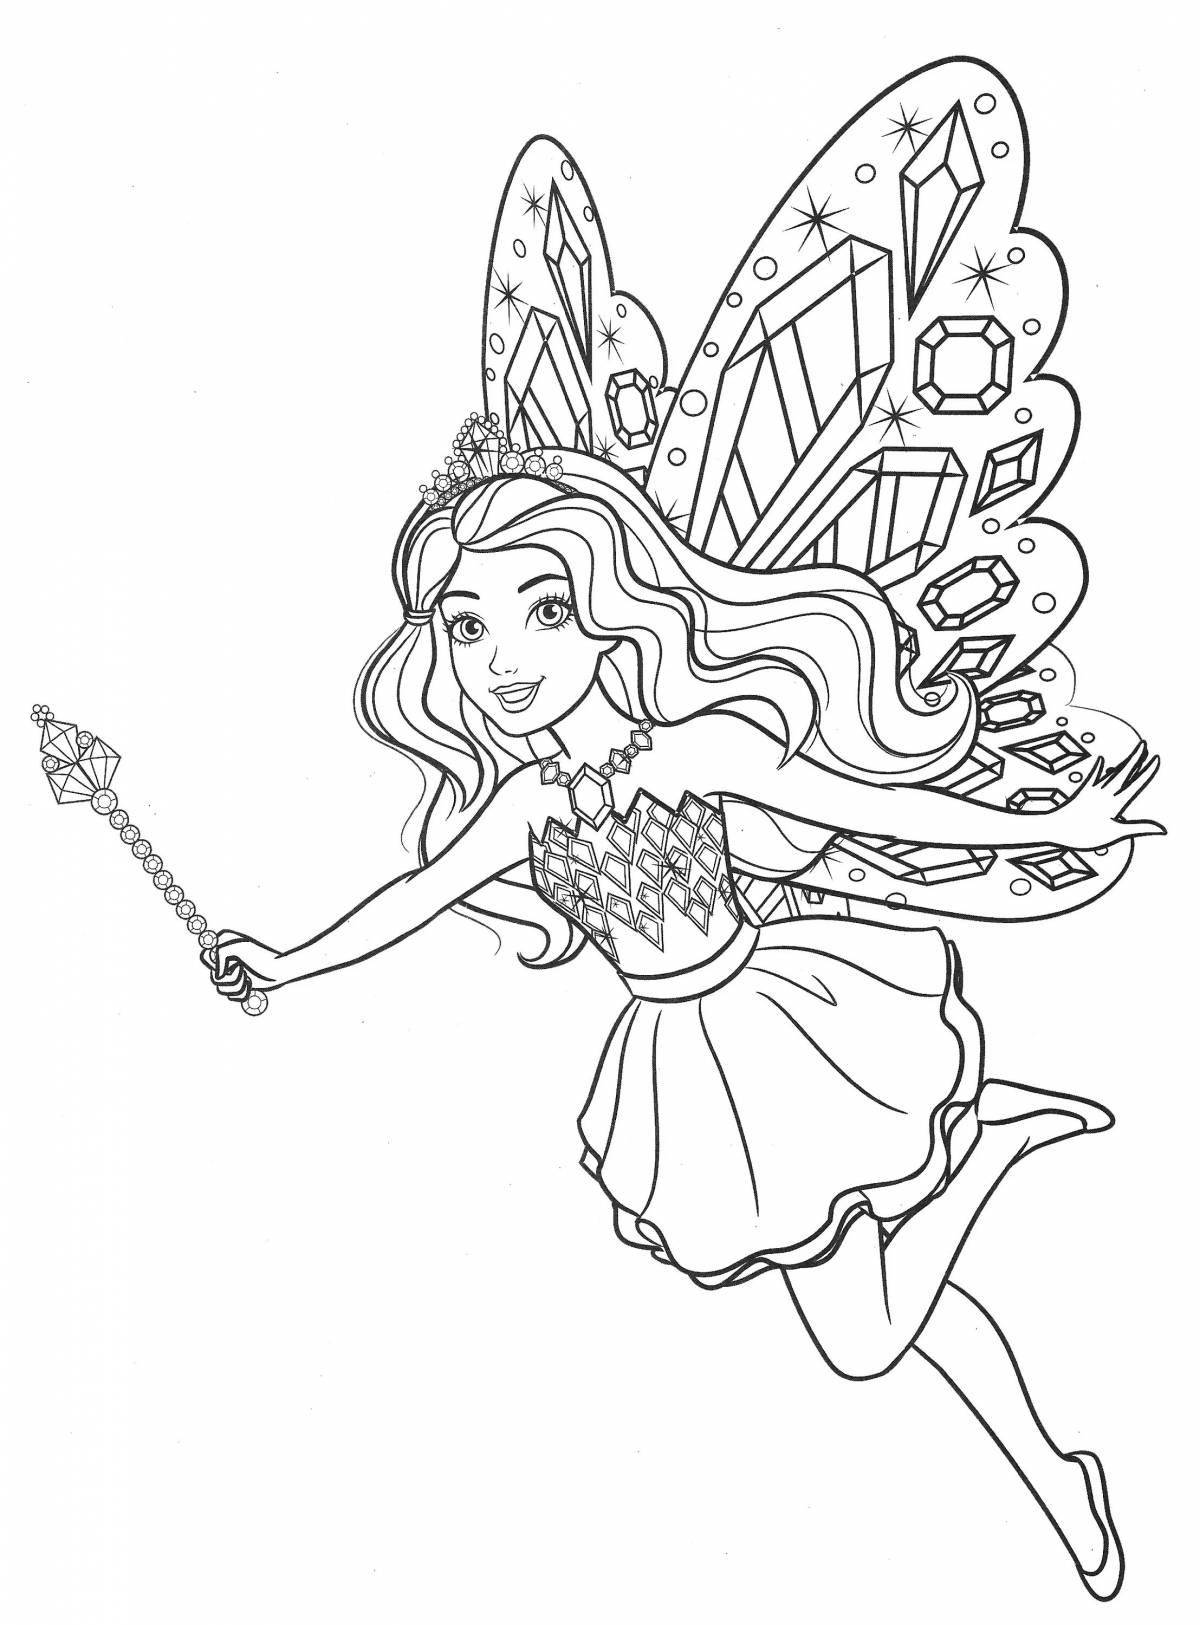 Exquisite coloring fairy with wings